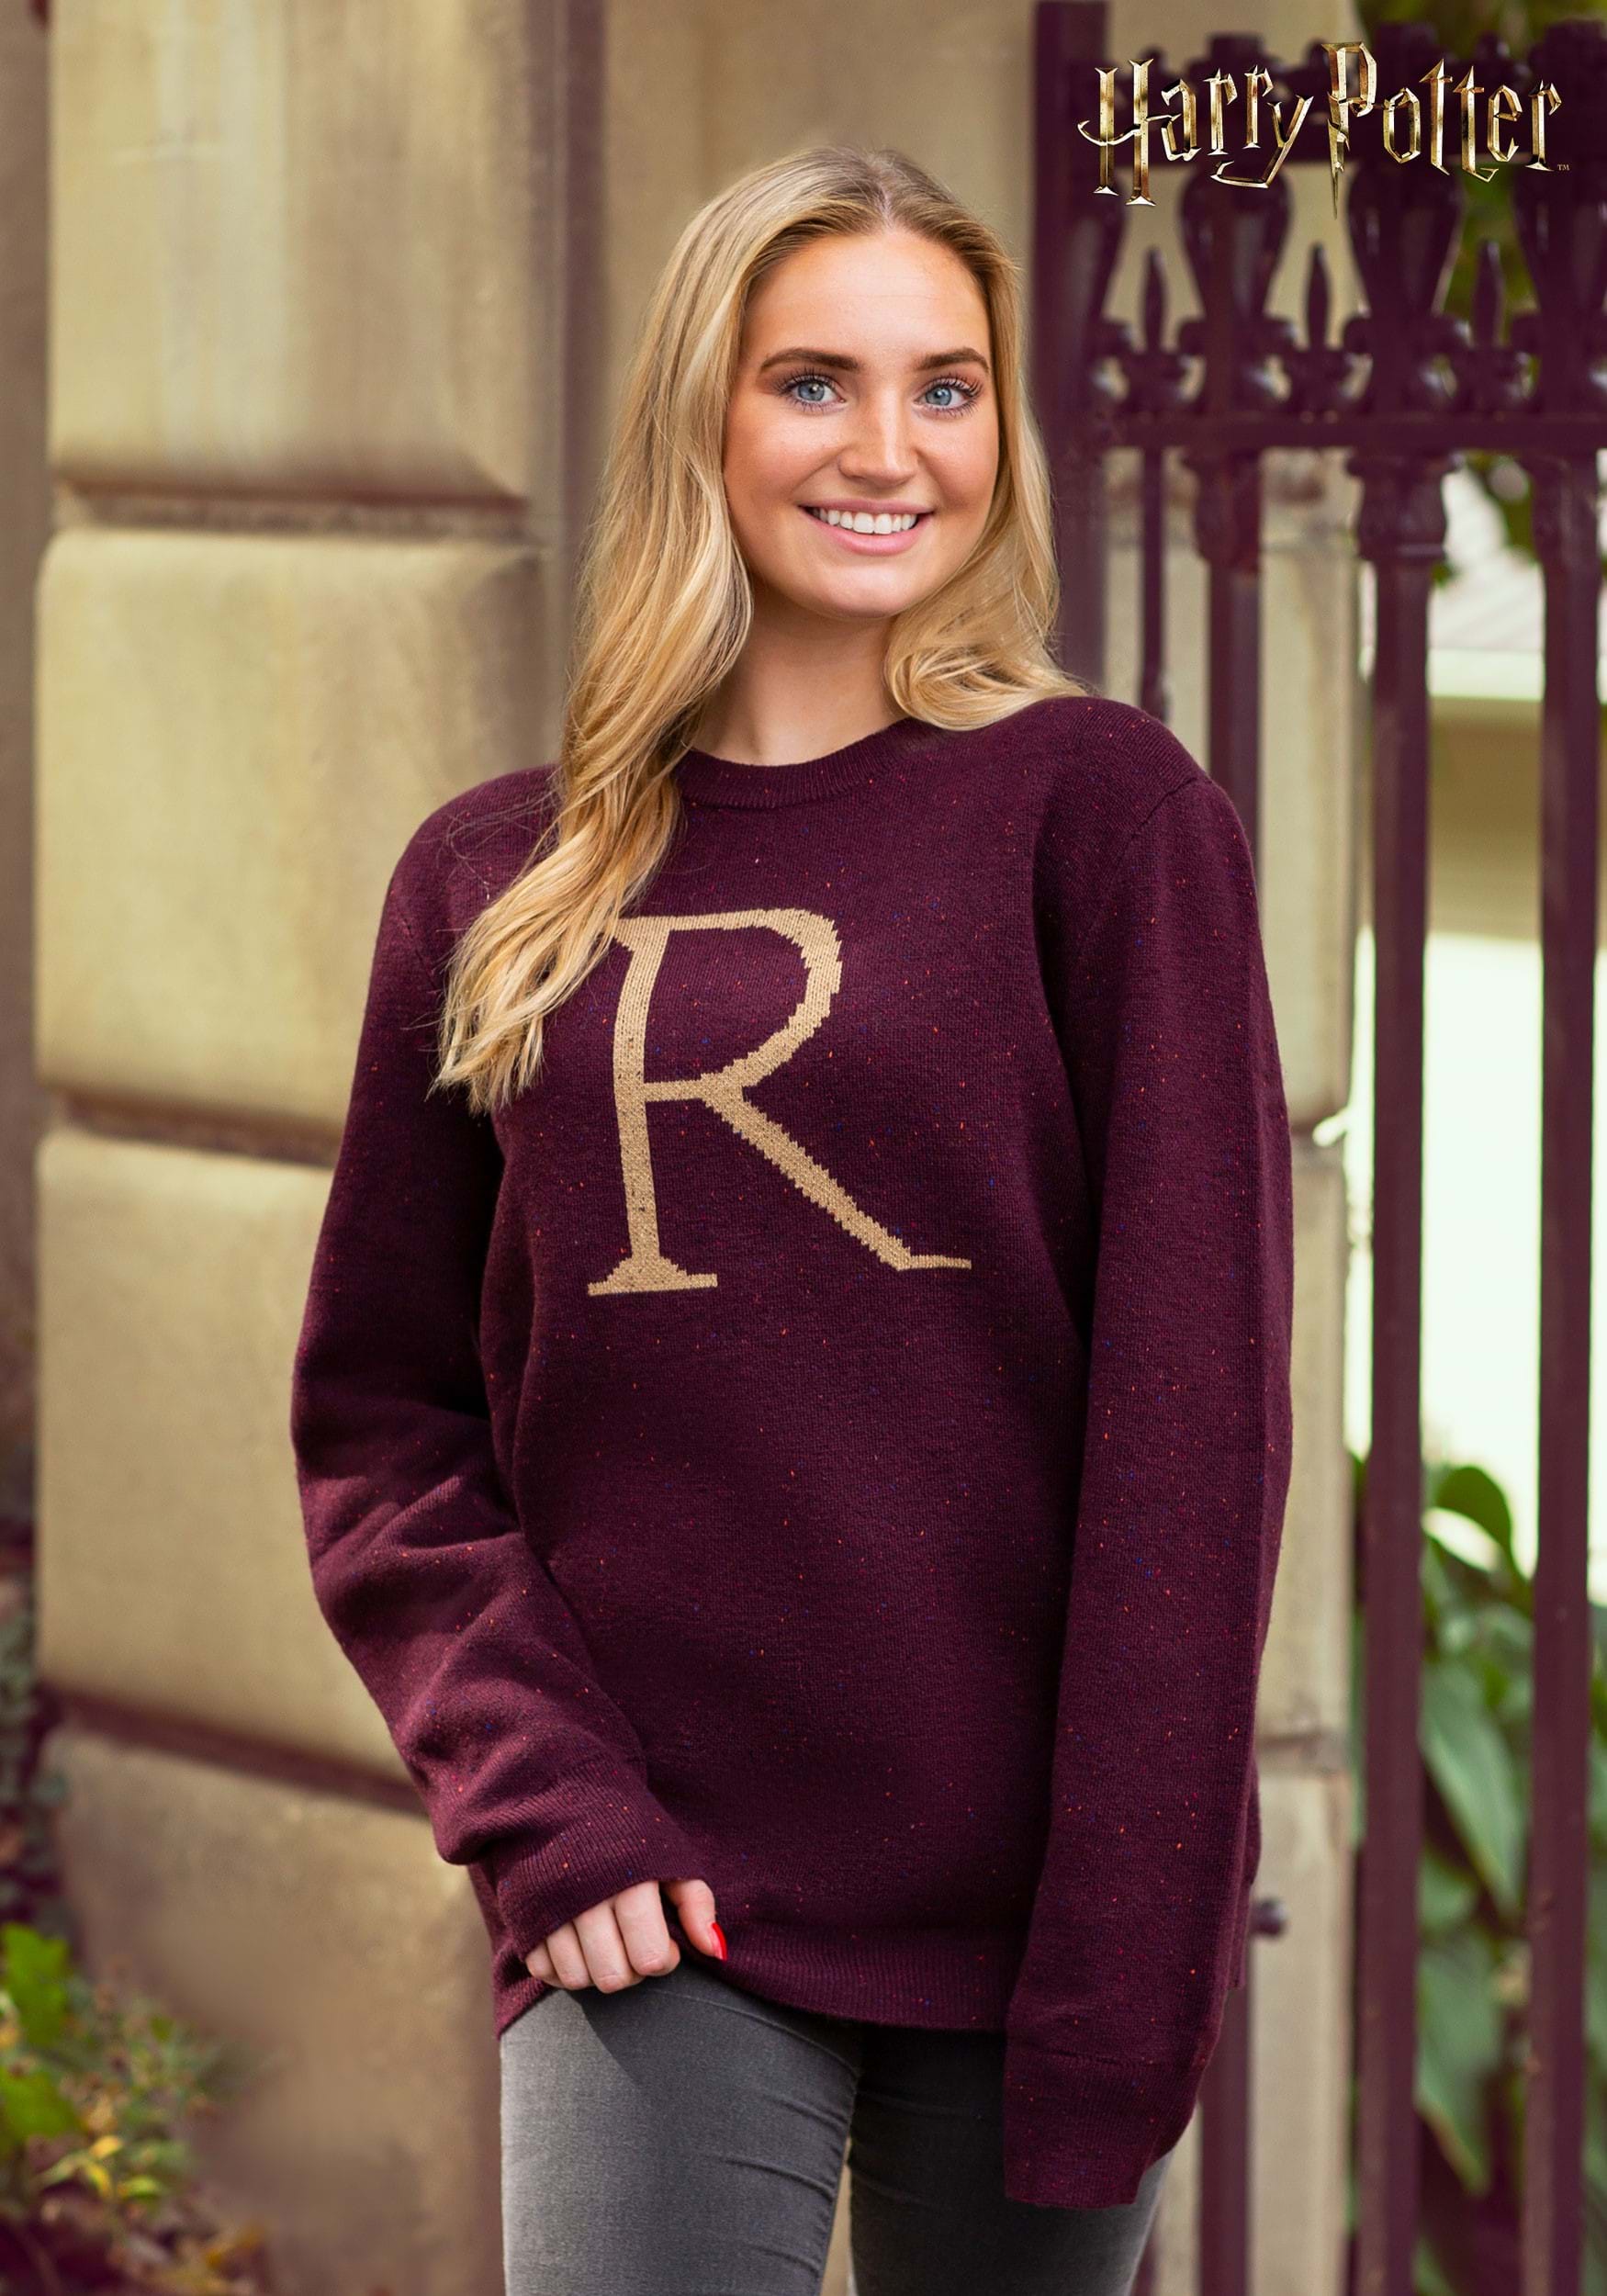 Ron Weasley “R” Christmas Sweater for Adults